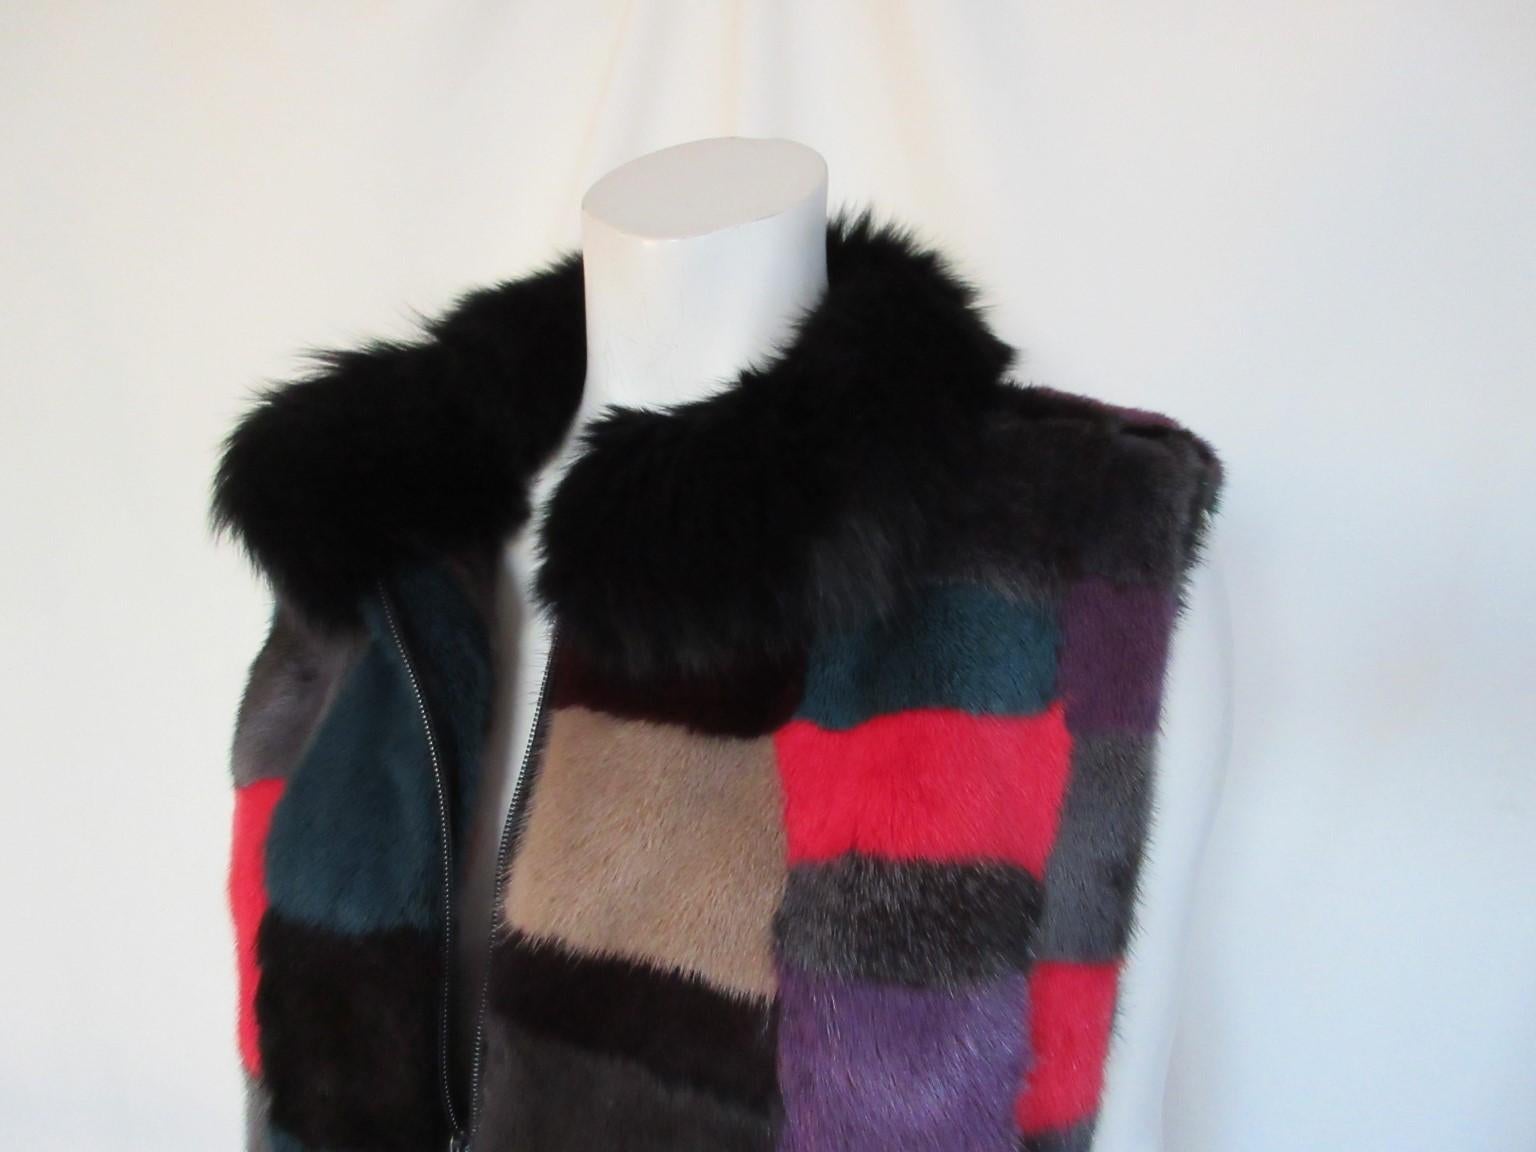 Exclusive soft mink fur vest with fox collar

We offer more exclusive fur items, view our frontstore

Details:
With 2 side pockets, 
closing zipper
fully lined
Colors; red, purple, black, brown
Size appears to be medium, please refer to the